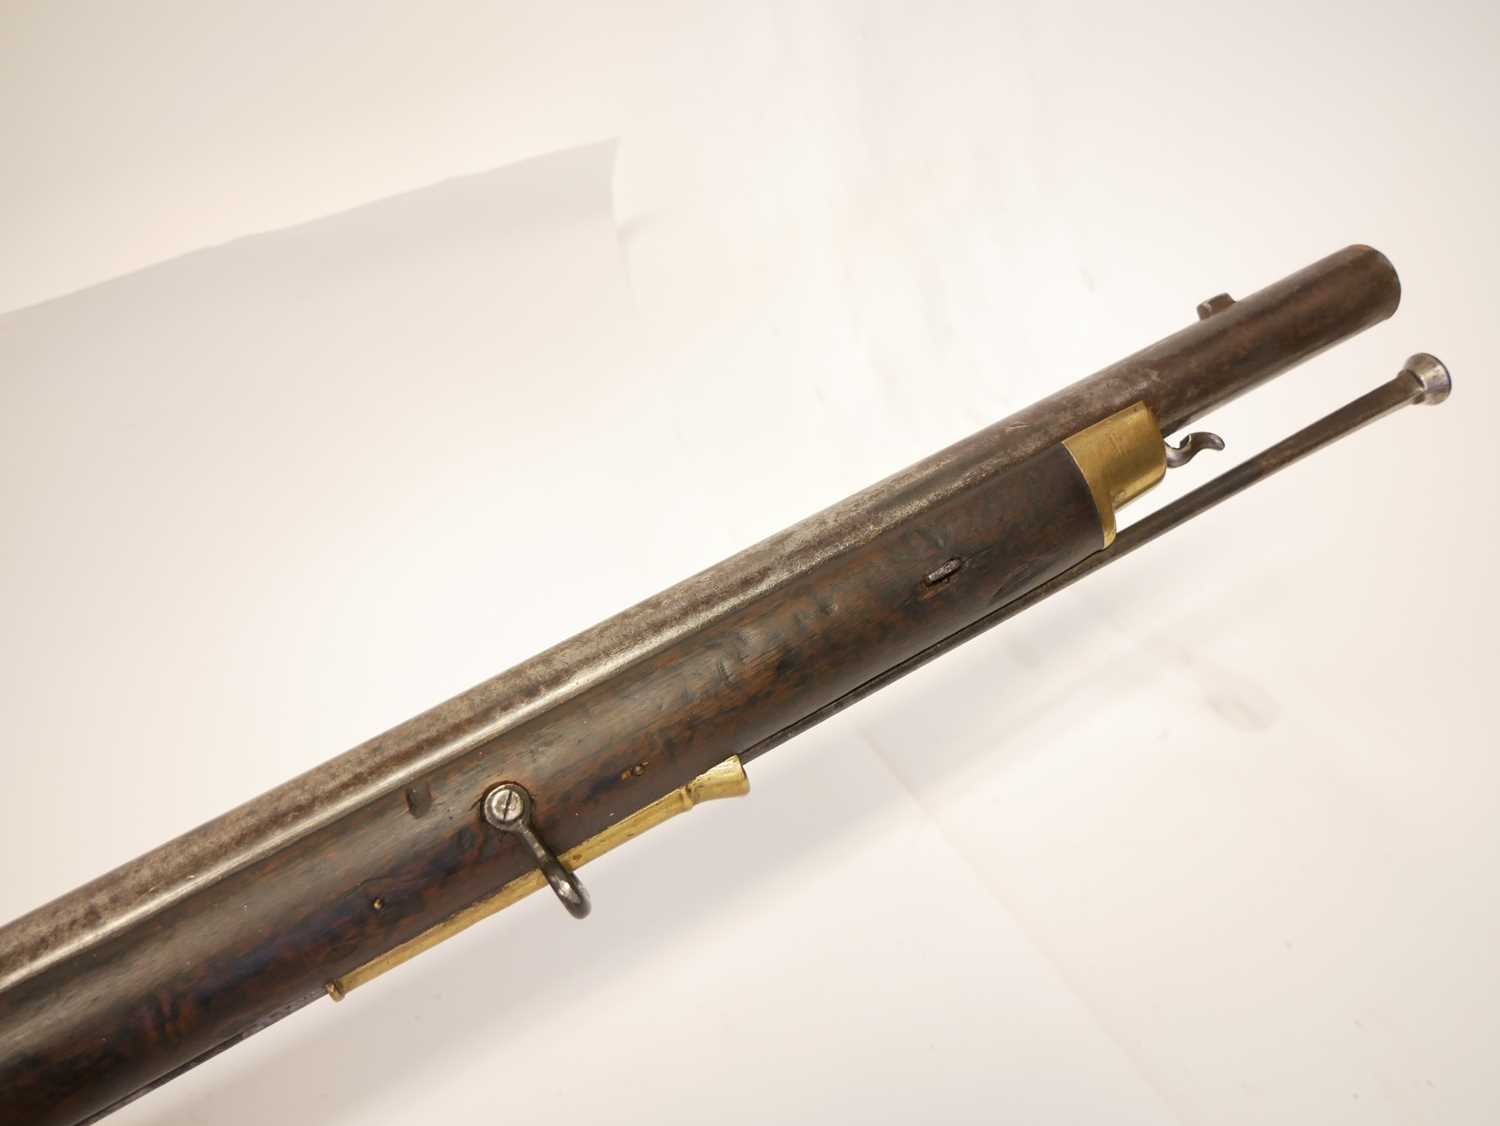 East India Company pattern D type 3 musket, - Image 9 of 14